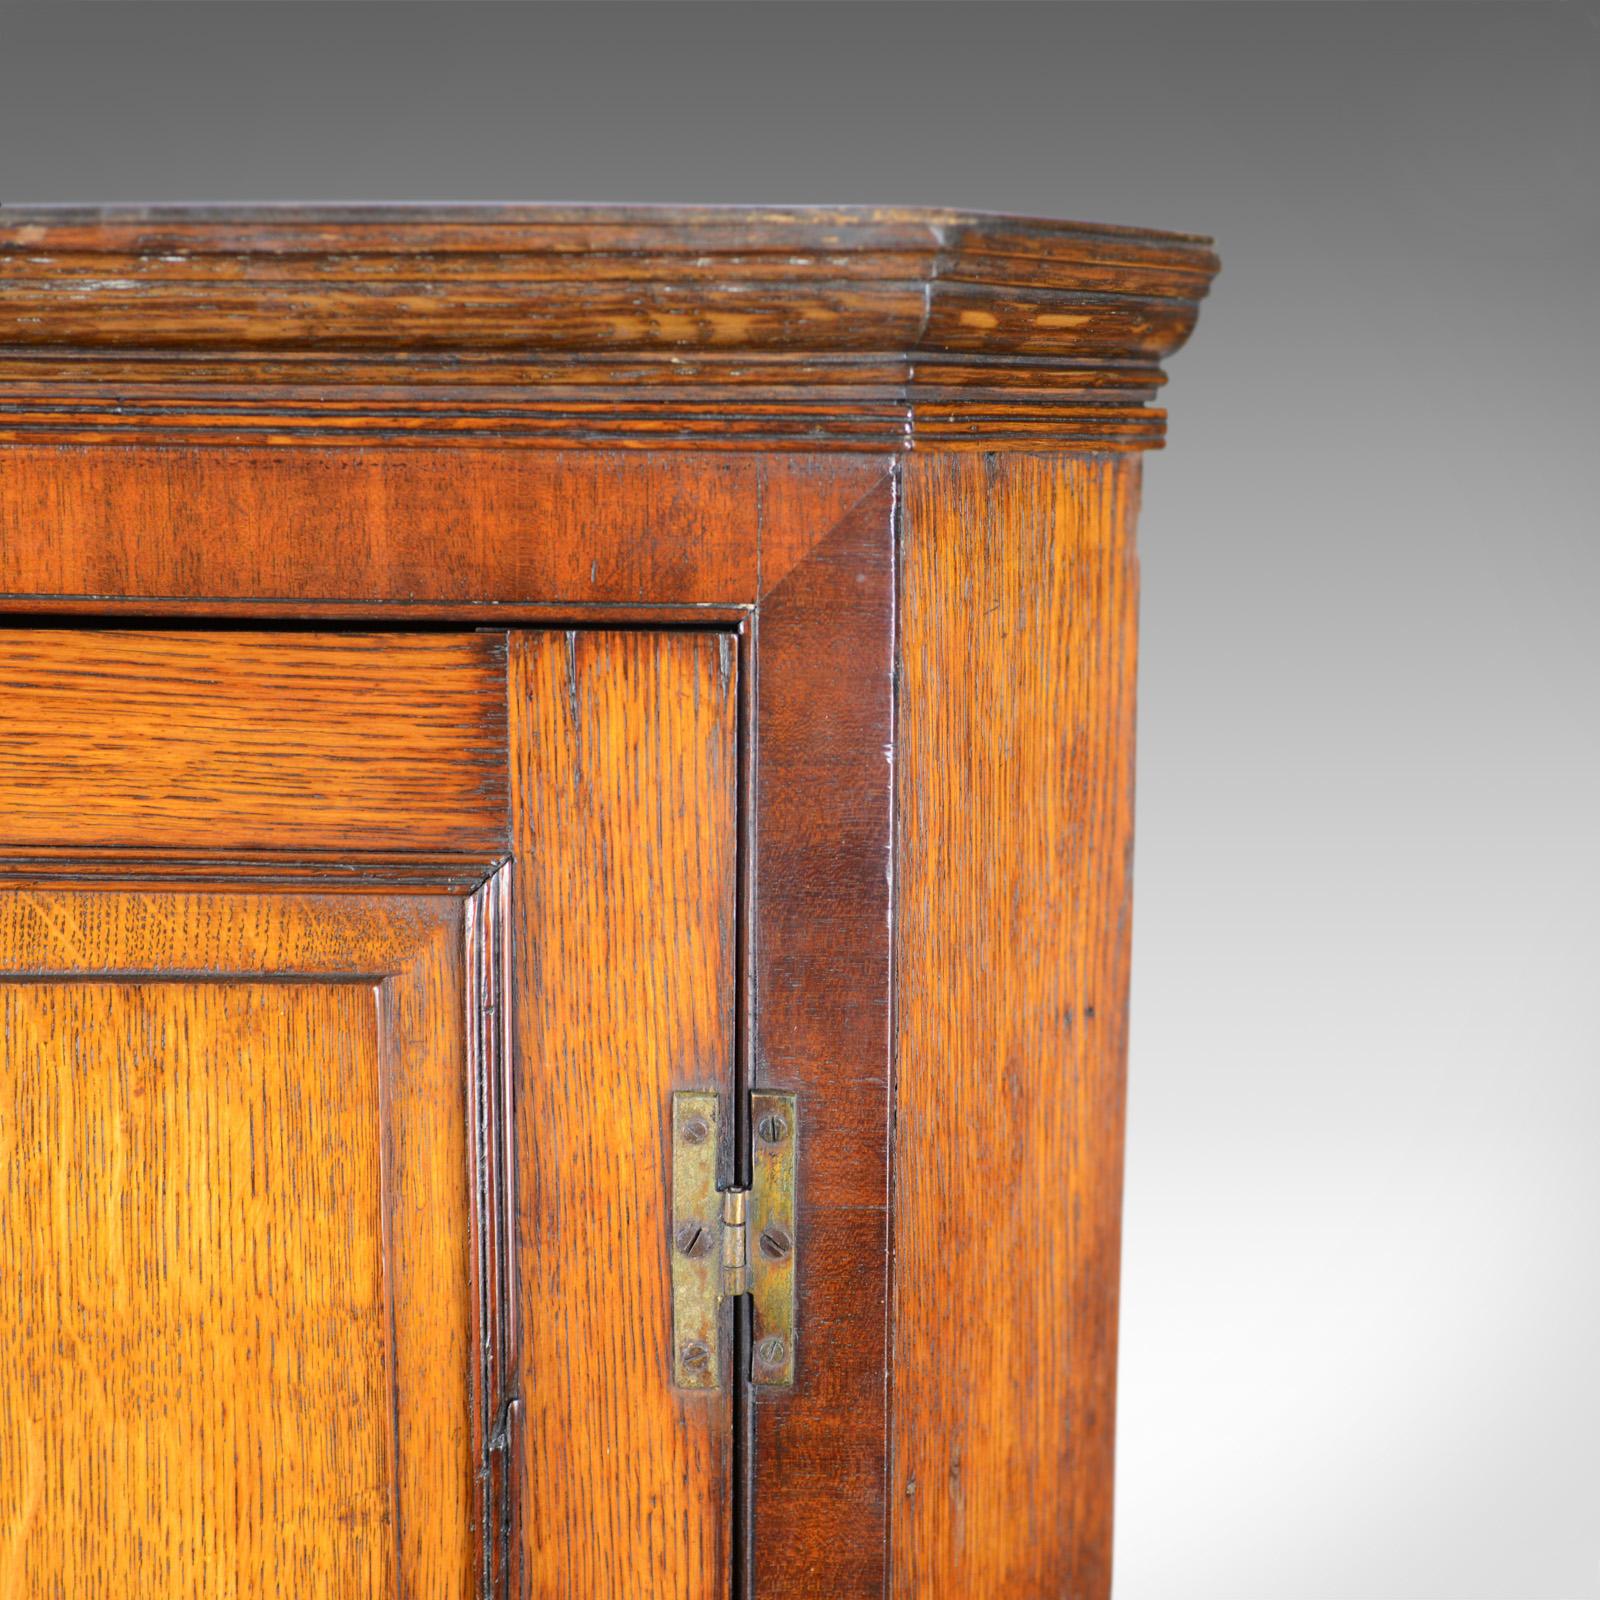 Antique Corner Cabinet on Stand, George III, Oak, Mahogany, circa 1770 and Later (Englisch)